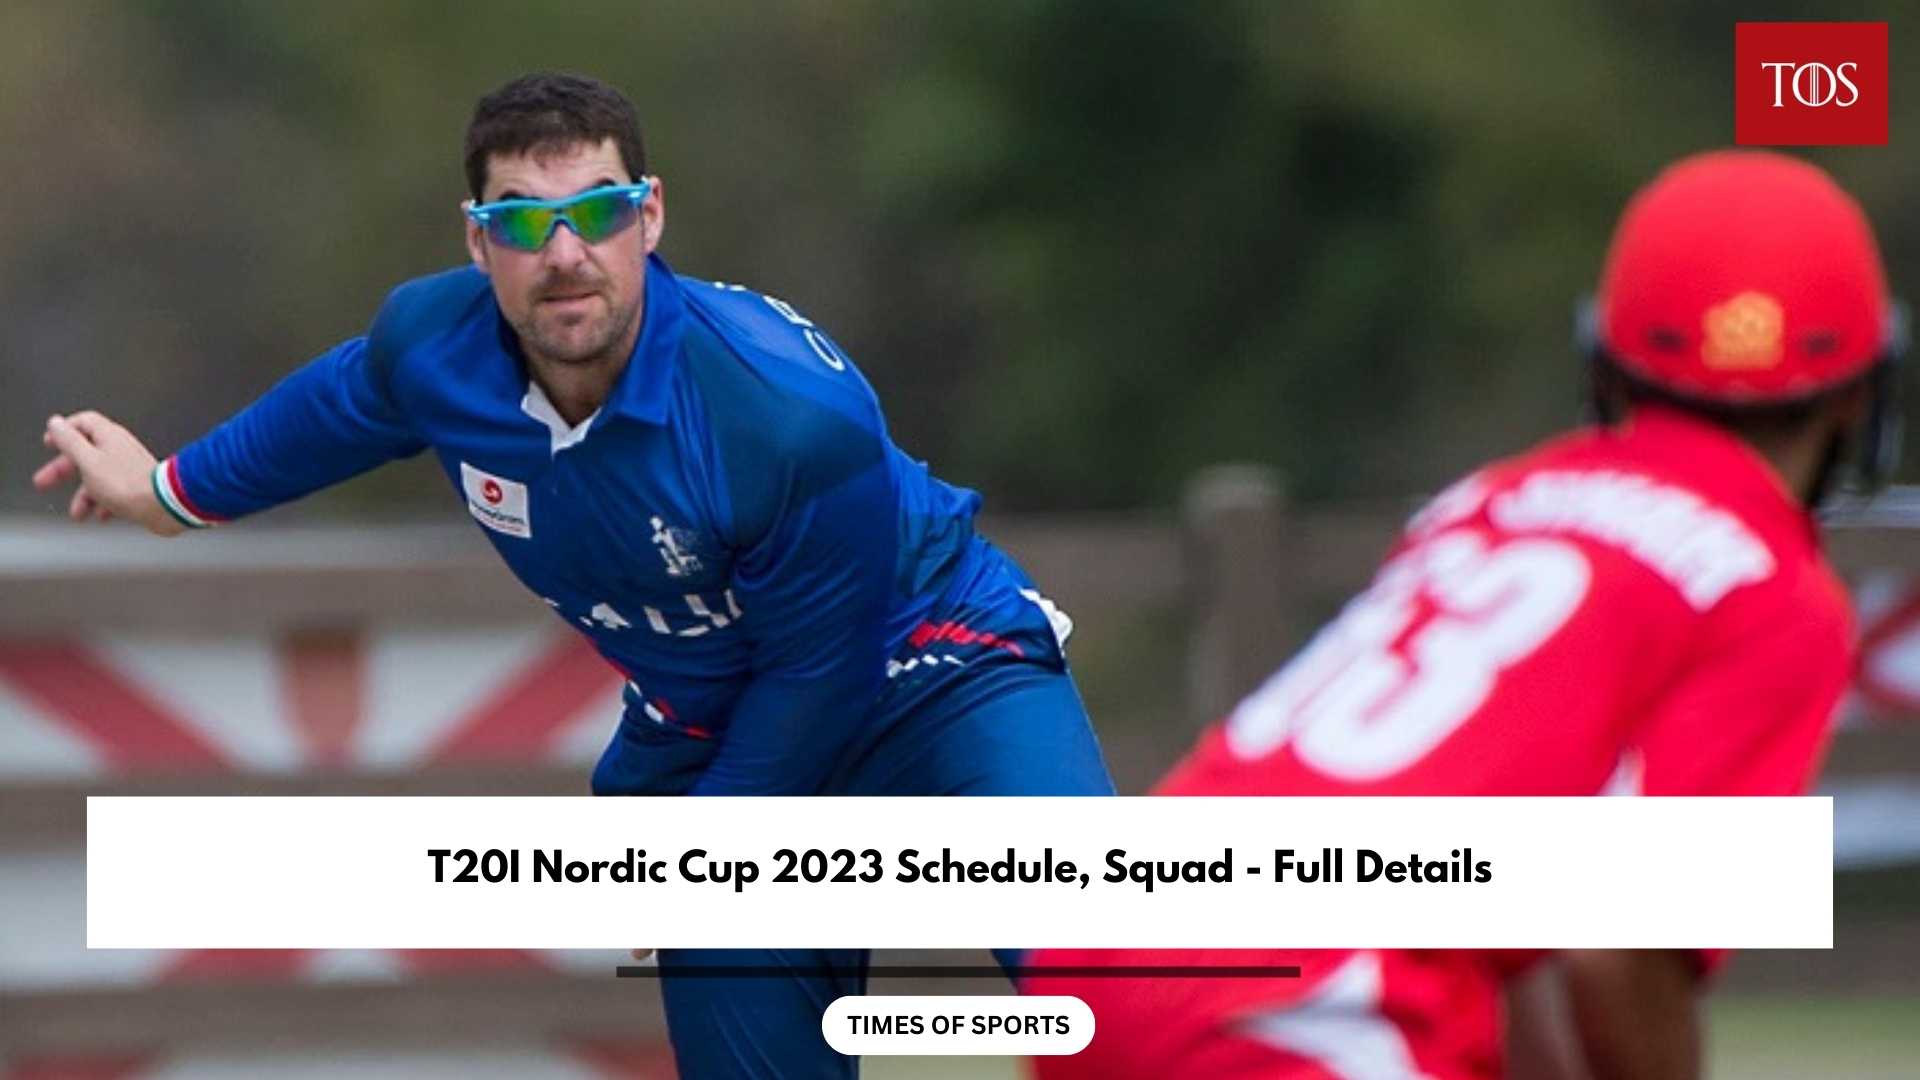 T20I Nordic Cup 2023 Schedule, Squad Full Details